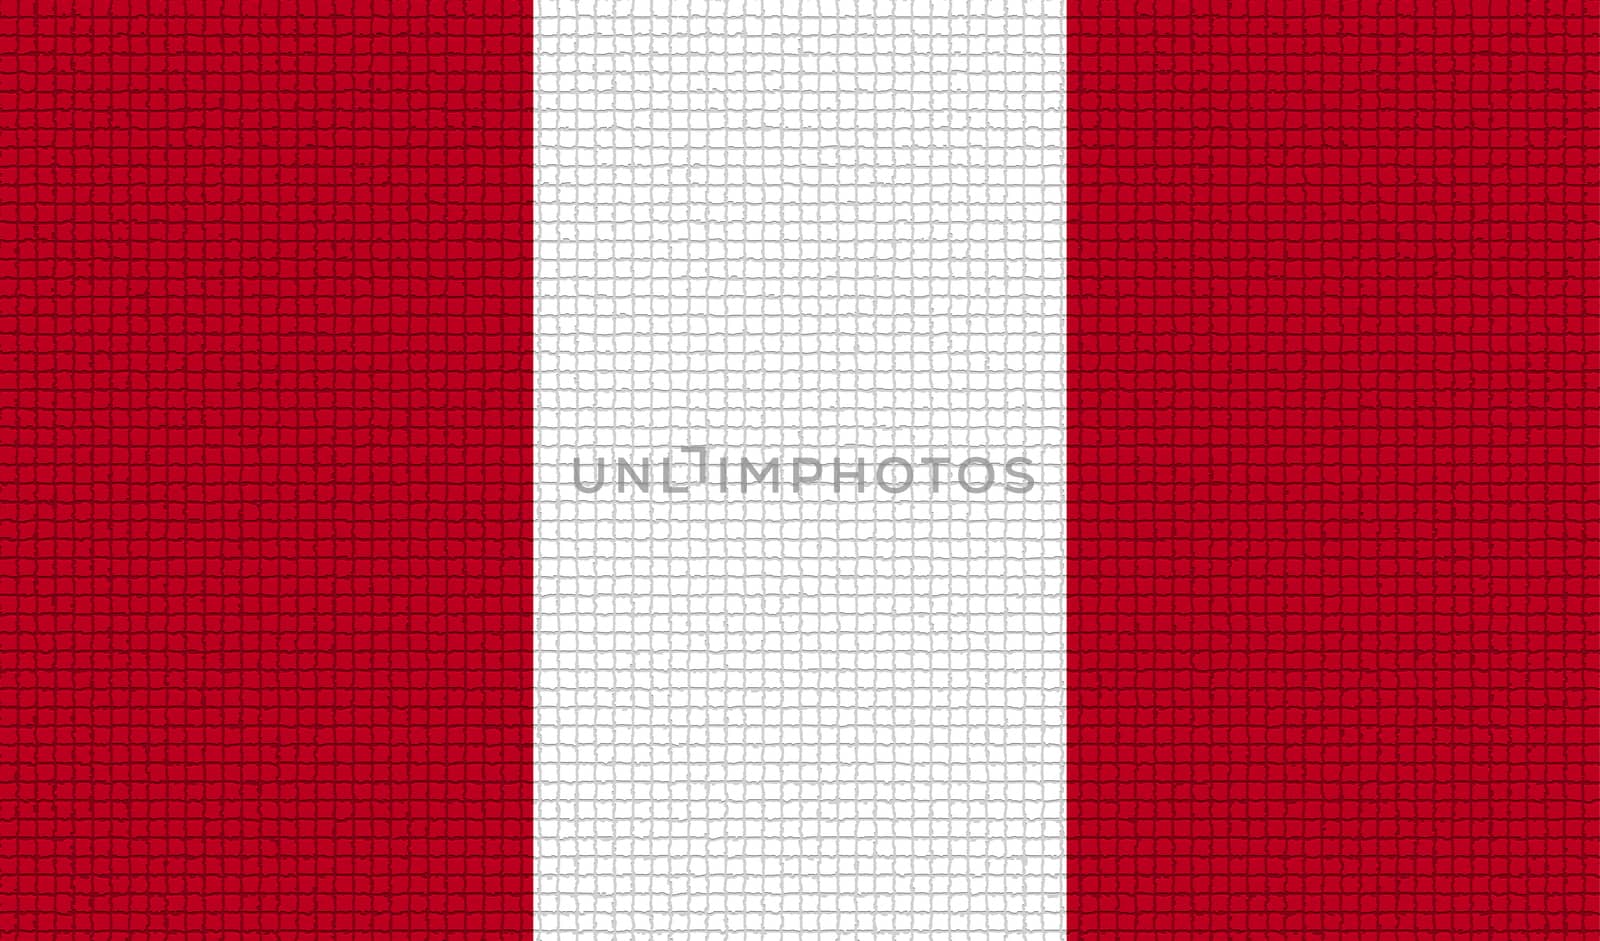 Flags of Peru with abstract textures. Rasterized version